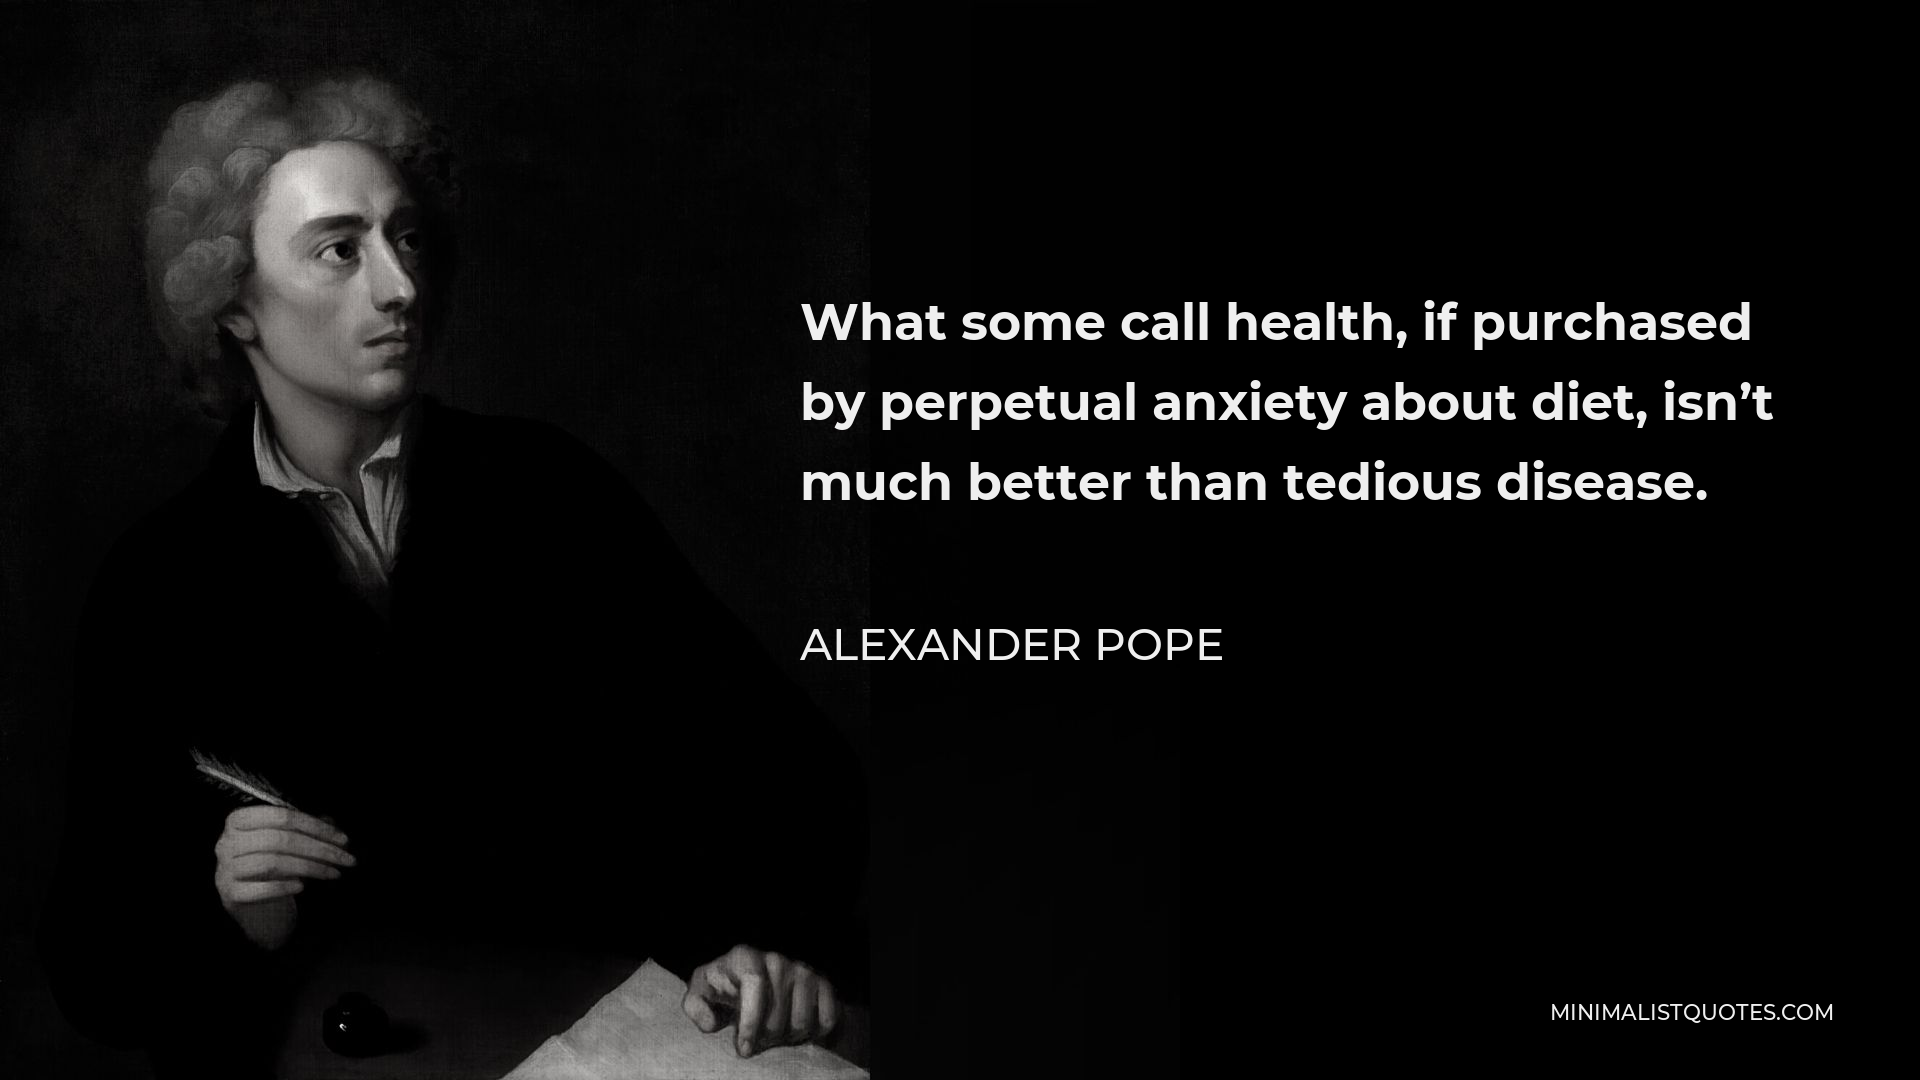 Alexander Pope Quote - What some call health, if purchased by perpetual anxiety about diet, isn’t much better than tedious disease.